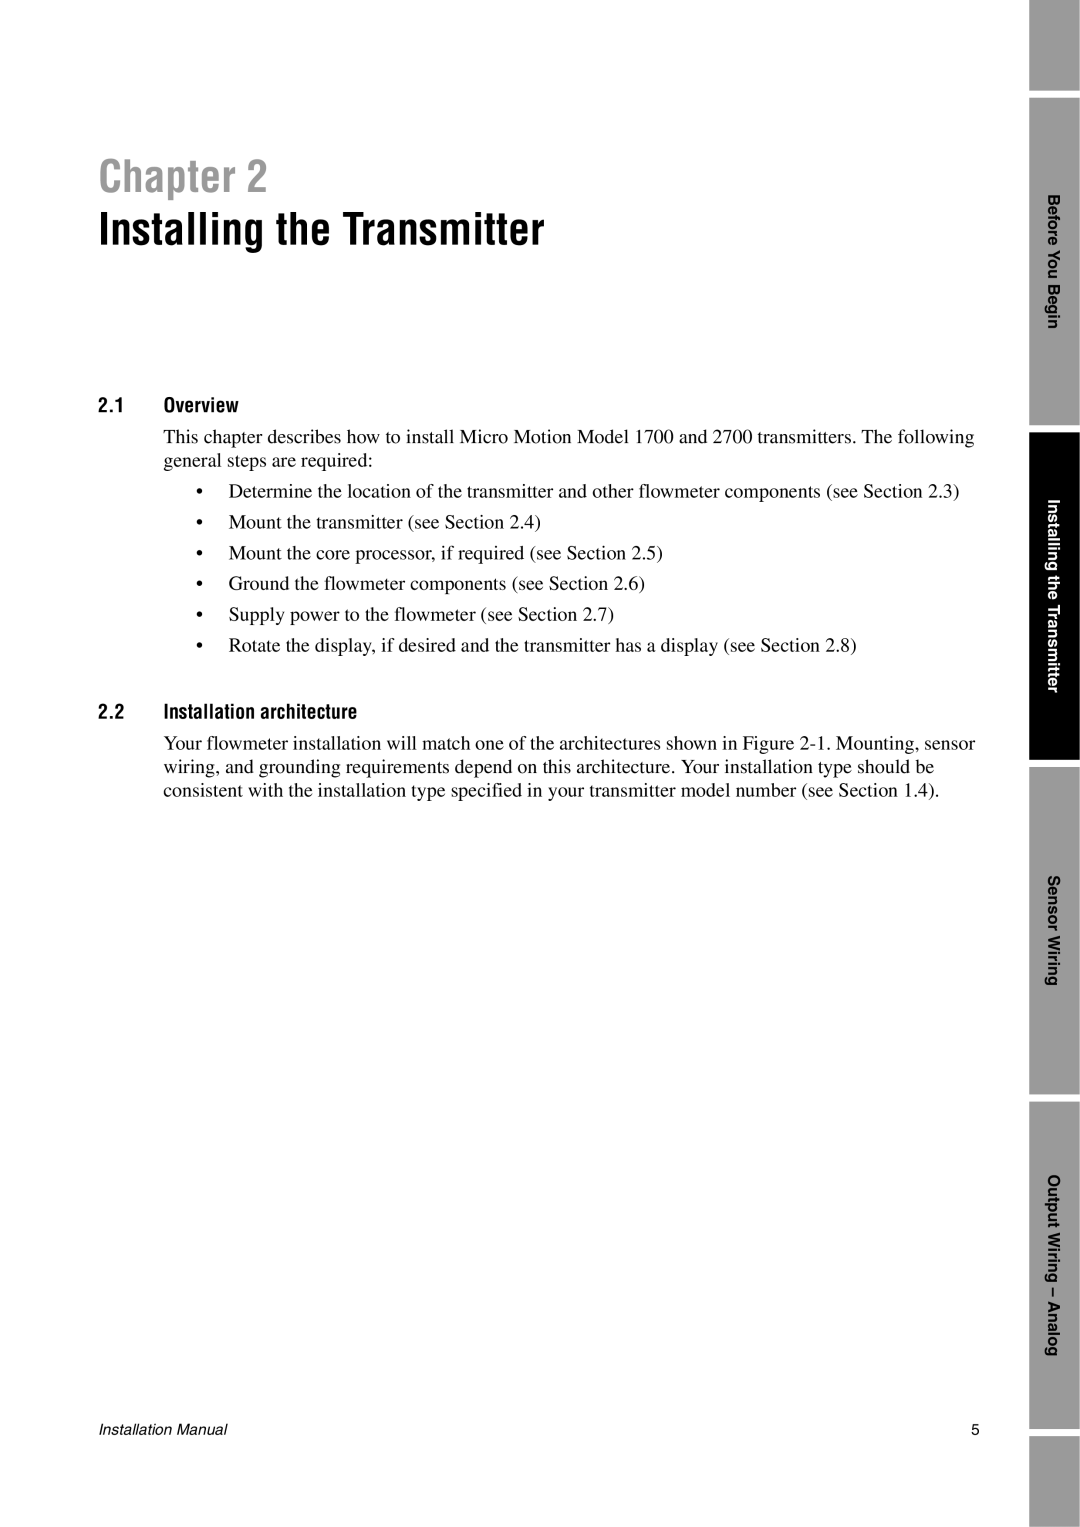 Emerson 2700, 1700 installation manual Installing the Transmitter, Chapter, 2.1Overview, 2.2Installation architecture 